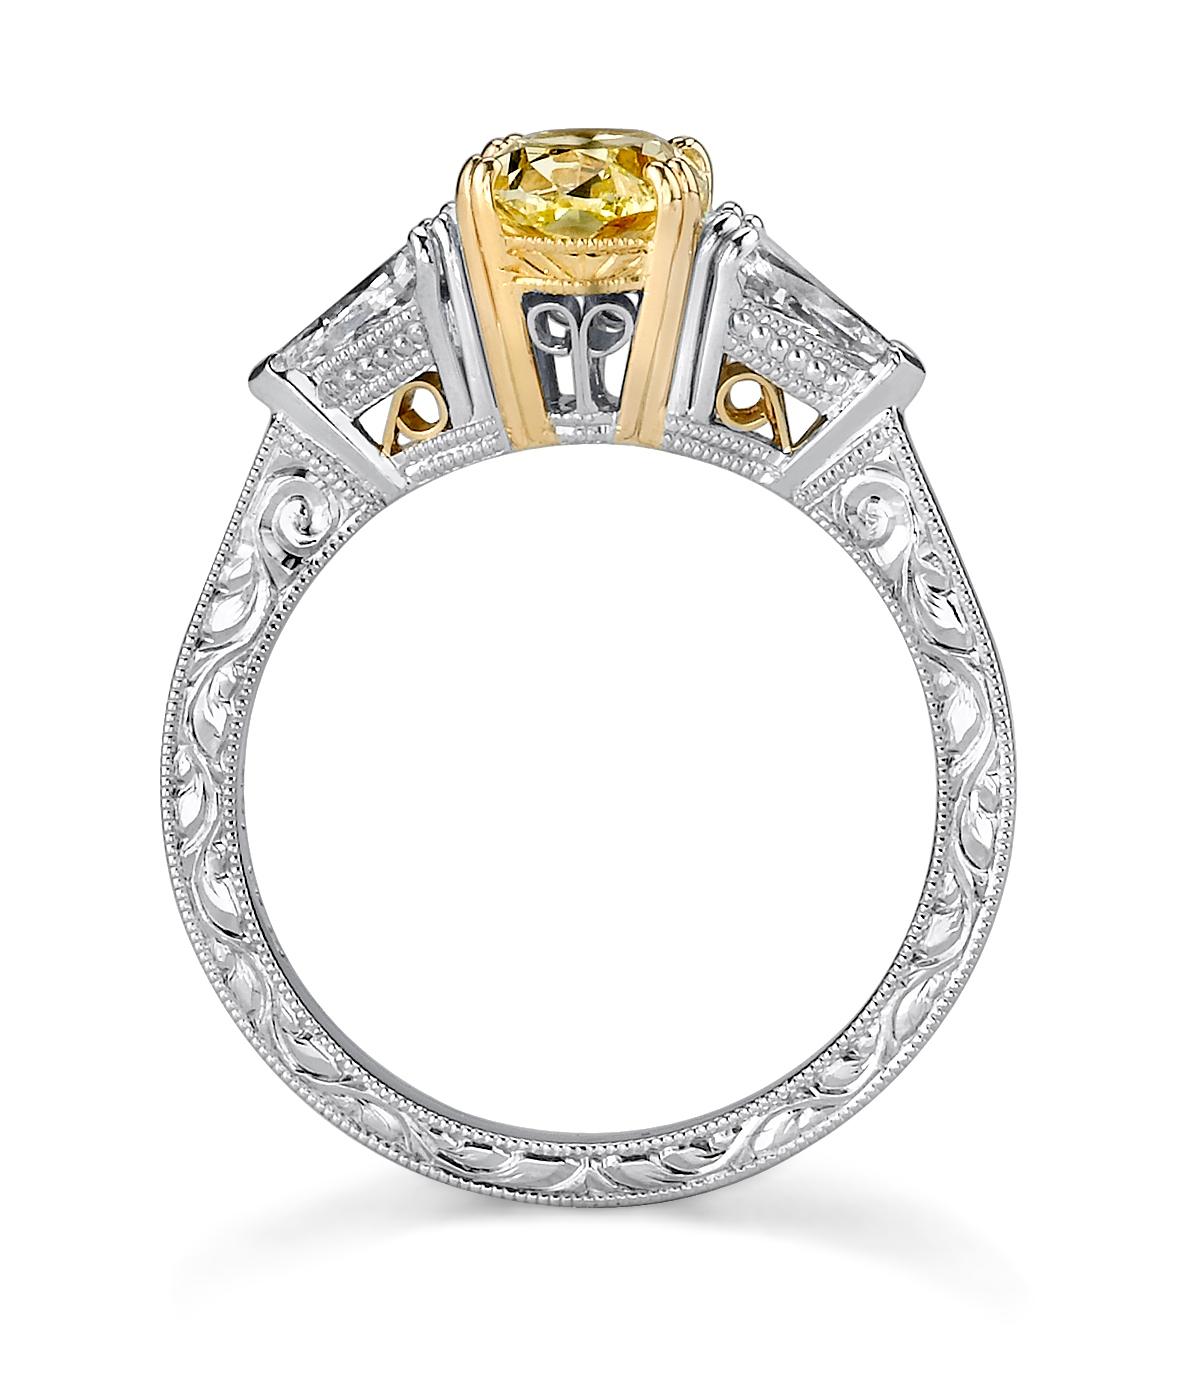 Fancy Oval Canary Yellow Diamond set in Platinum and accented with two.75ct Kite Shaped Side Diamonds. GIA Certified, center diamond, Fancy Yellow 1.18 CT Center Stone. For centuries, fancy color diamonds have adorned kings and queens from all over